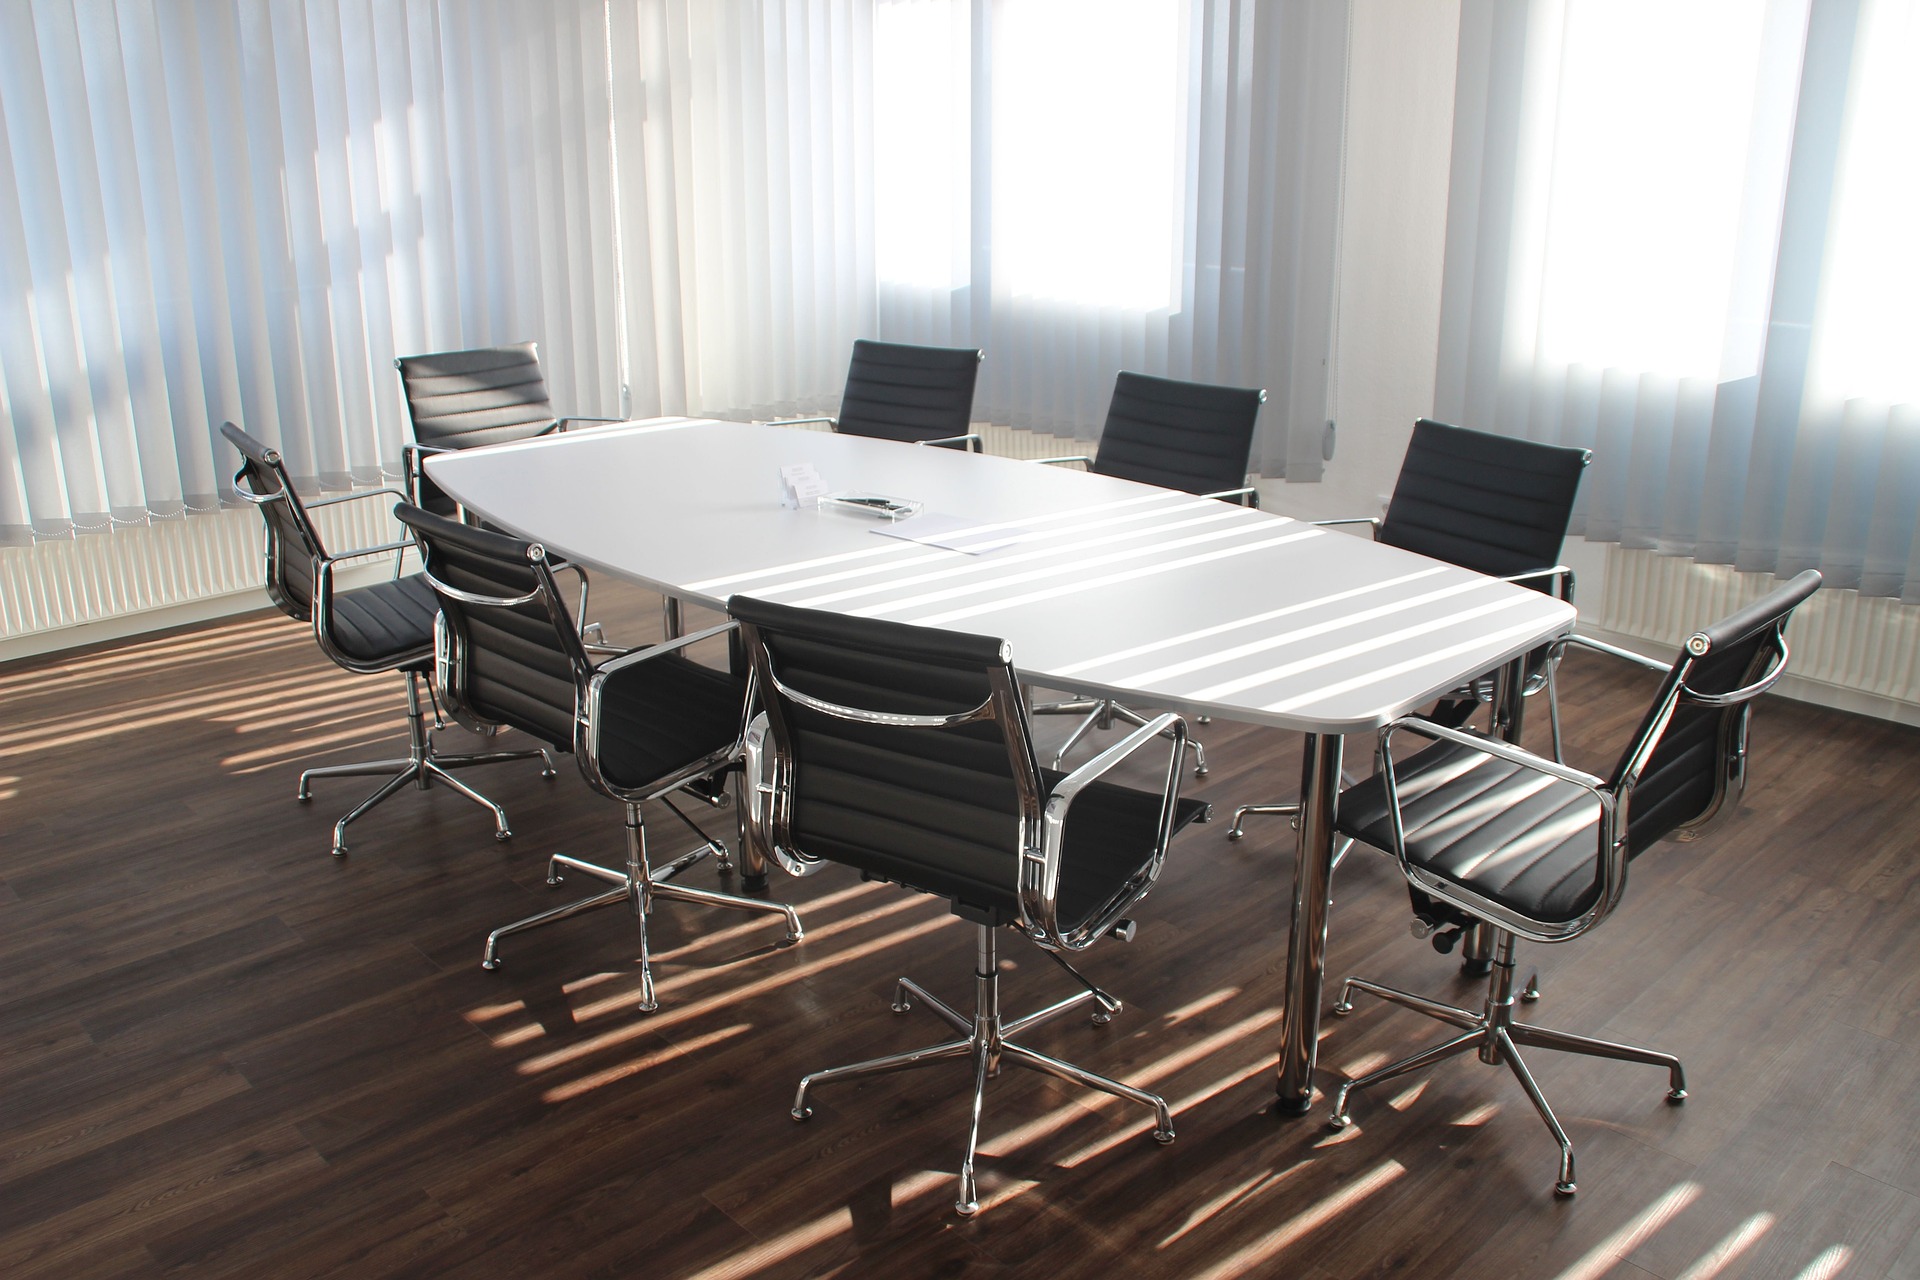 An modern boardroom table in a well-lit office space.